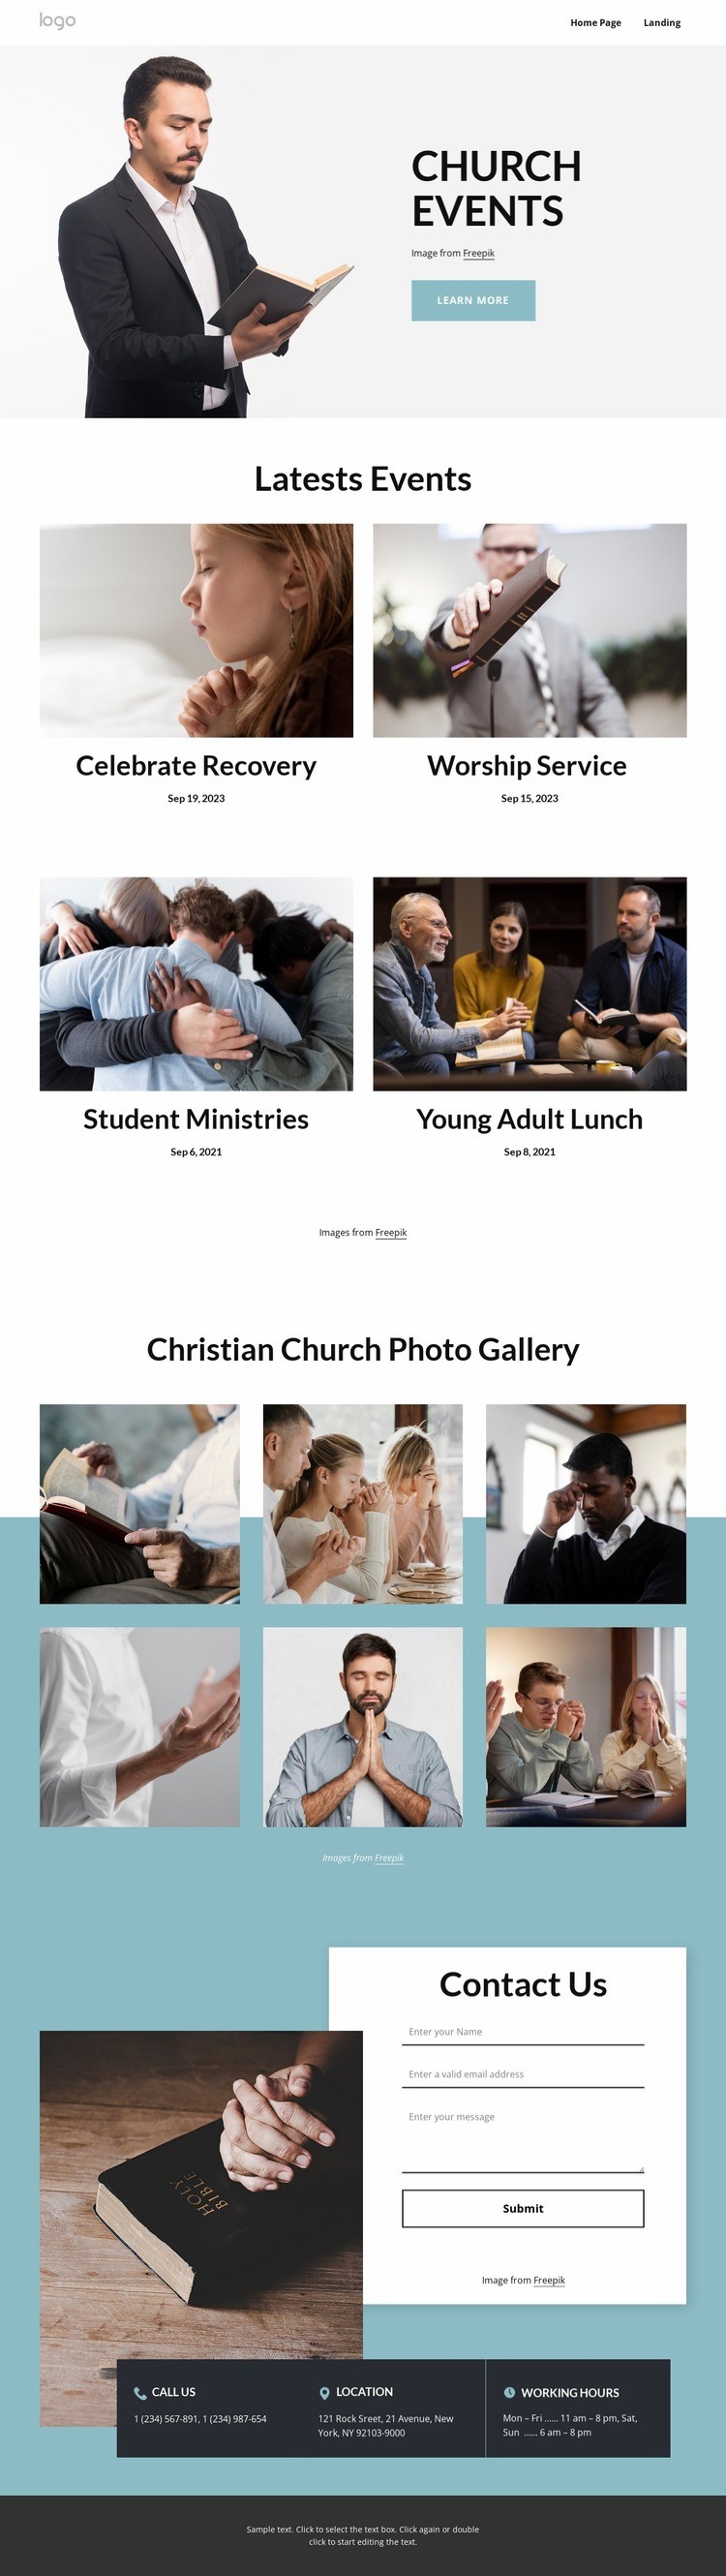 Church events Html Code Example